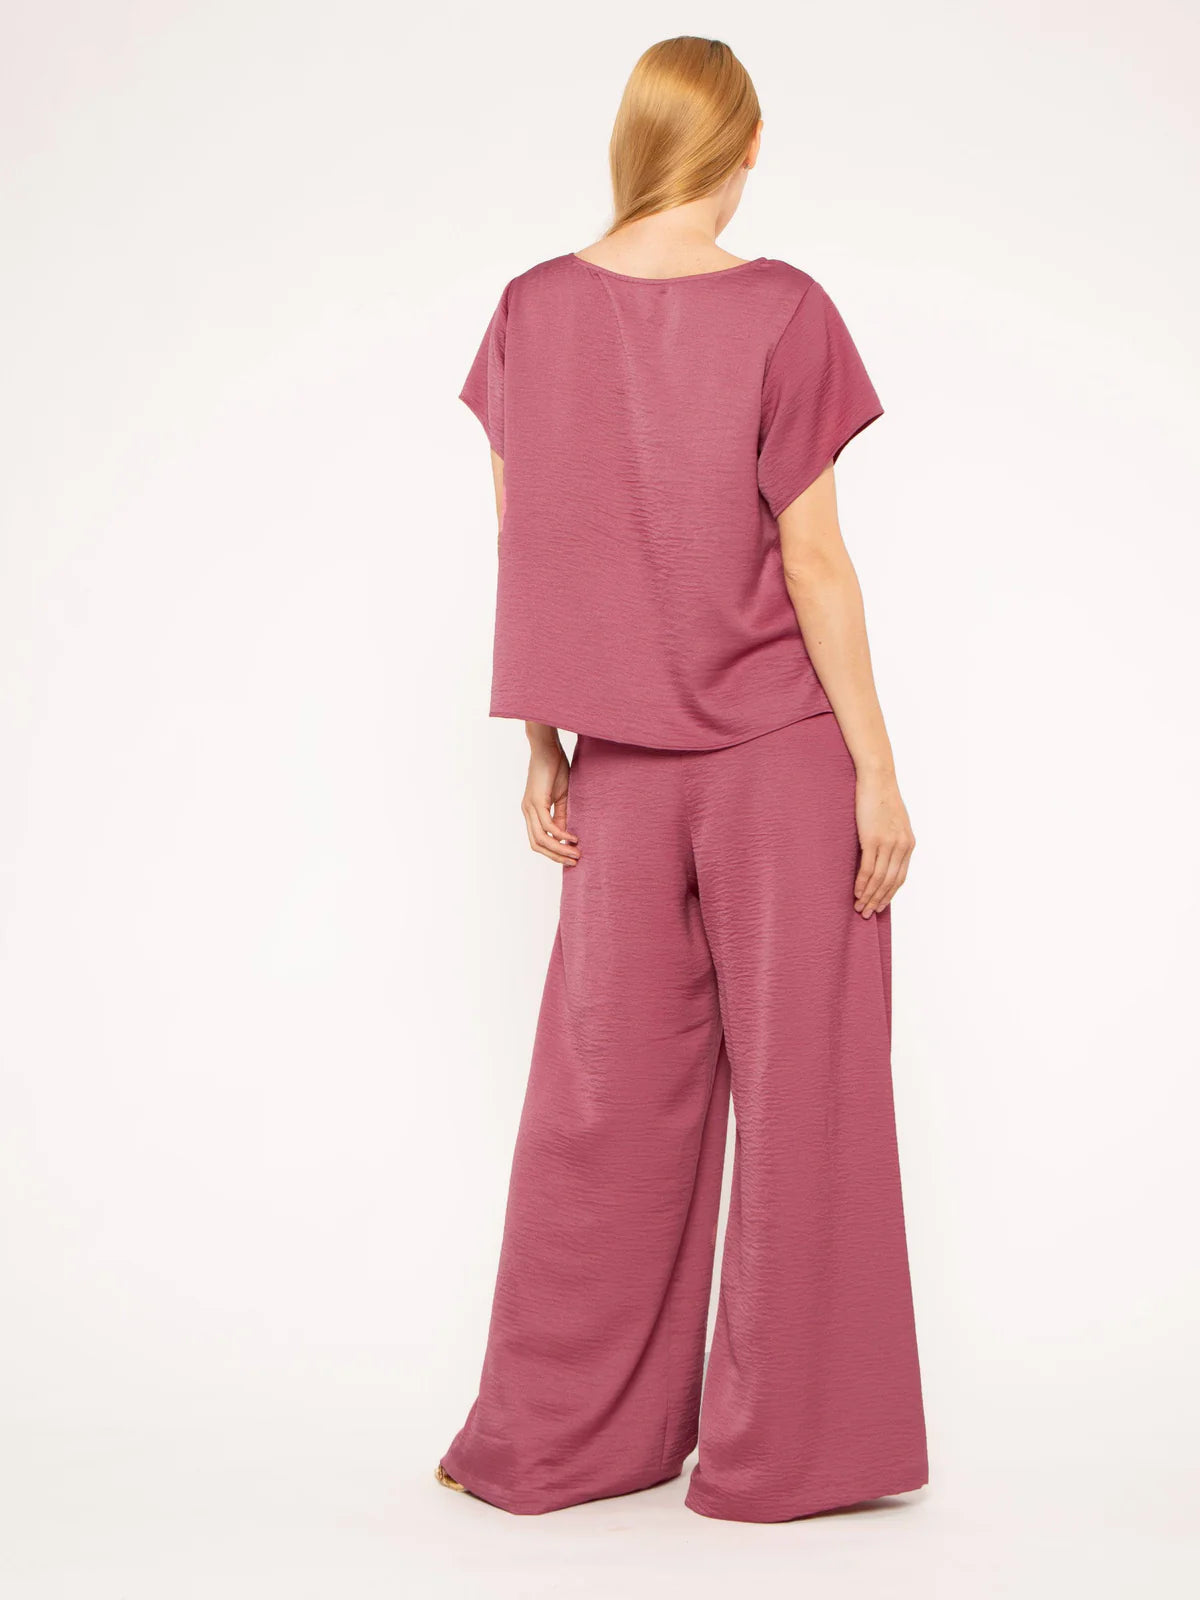 Ripley Rader - Mulberry Satin Crepe Everyday T-Shirt - Council Studio